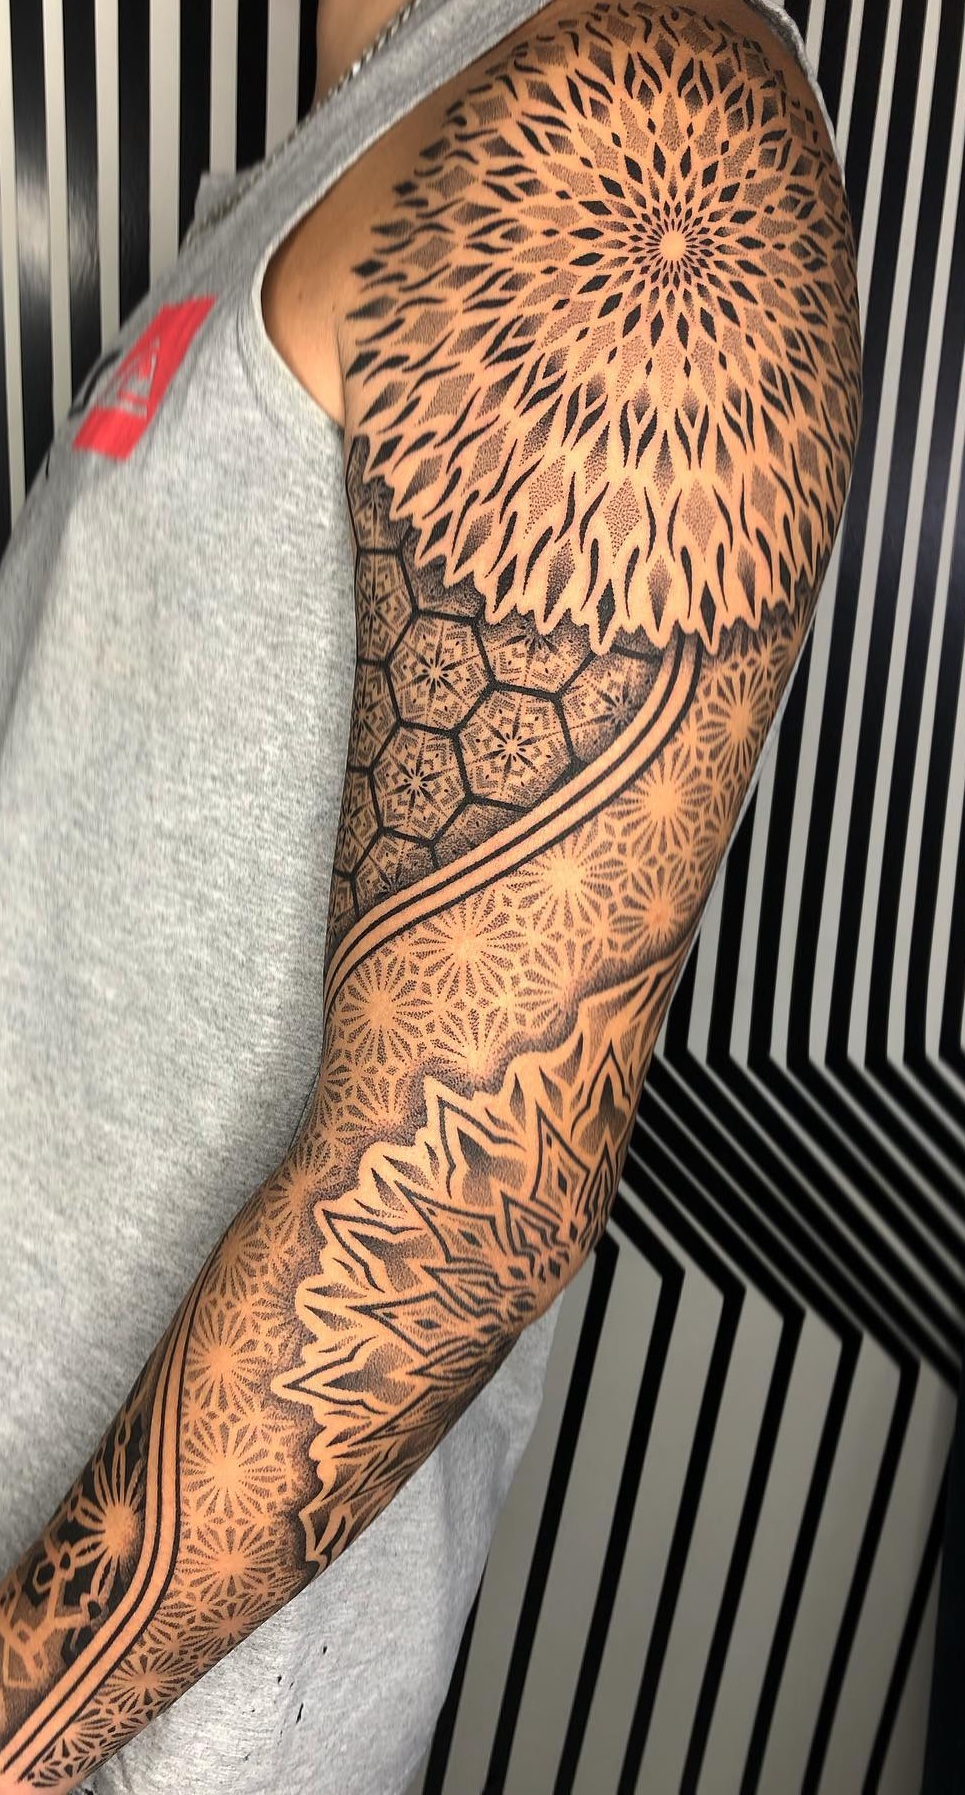 Amazing Band Tattoo | Latest Hand Tattoos For Men. | Forearm band tattoos,  Band tattoos for men, Hand tattoos for guys